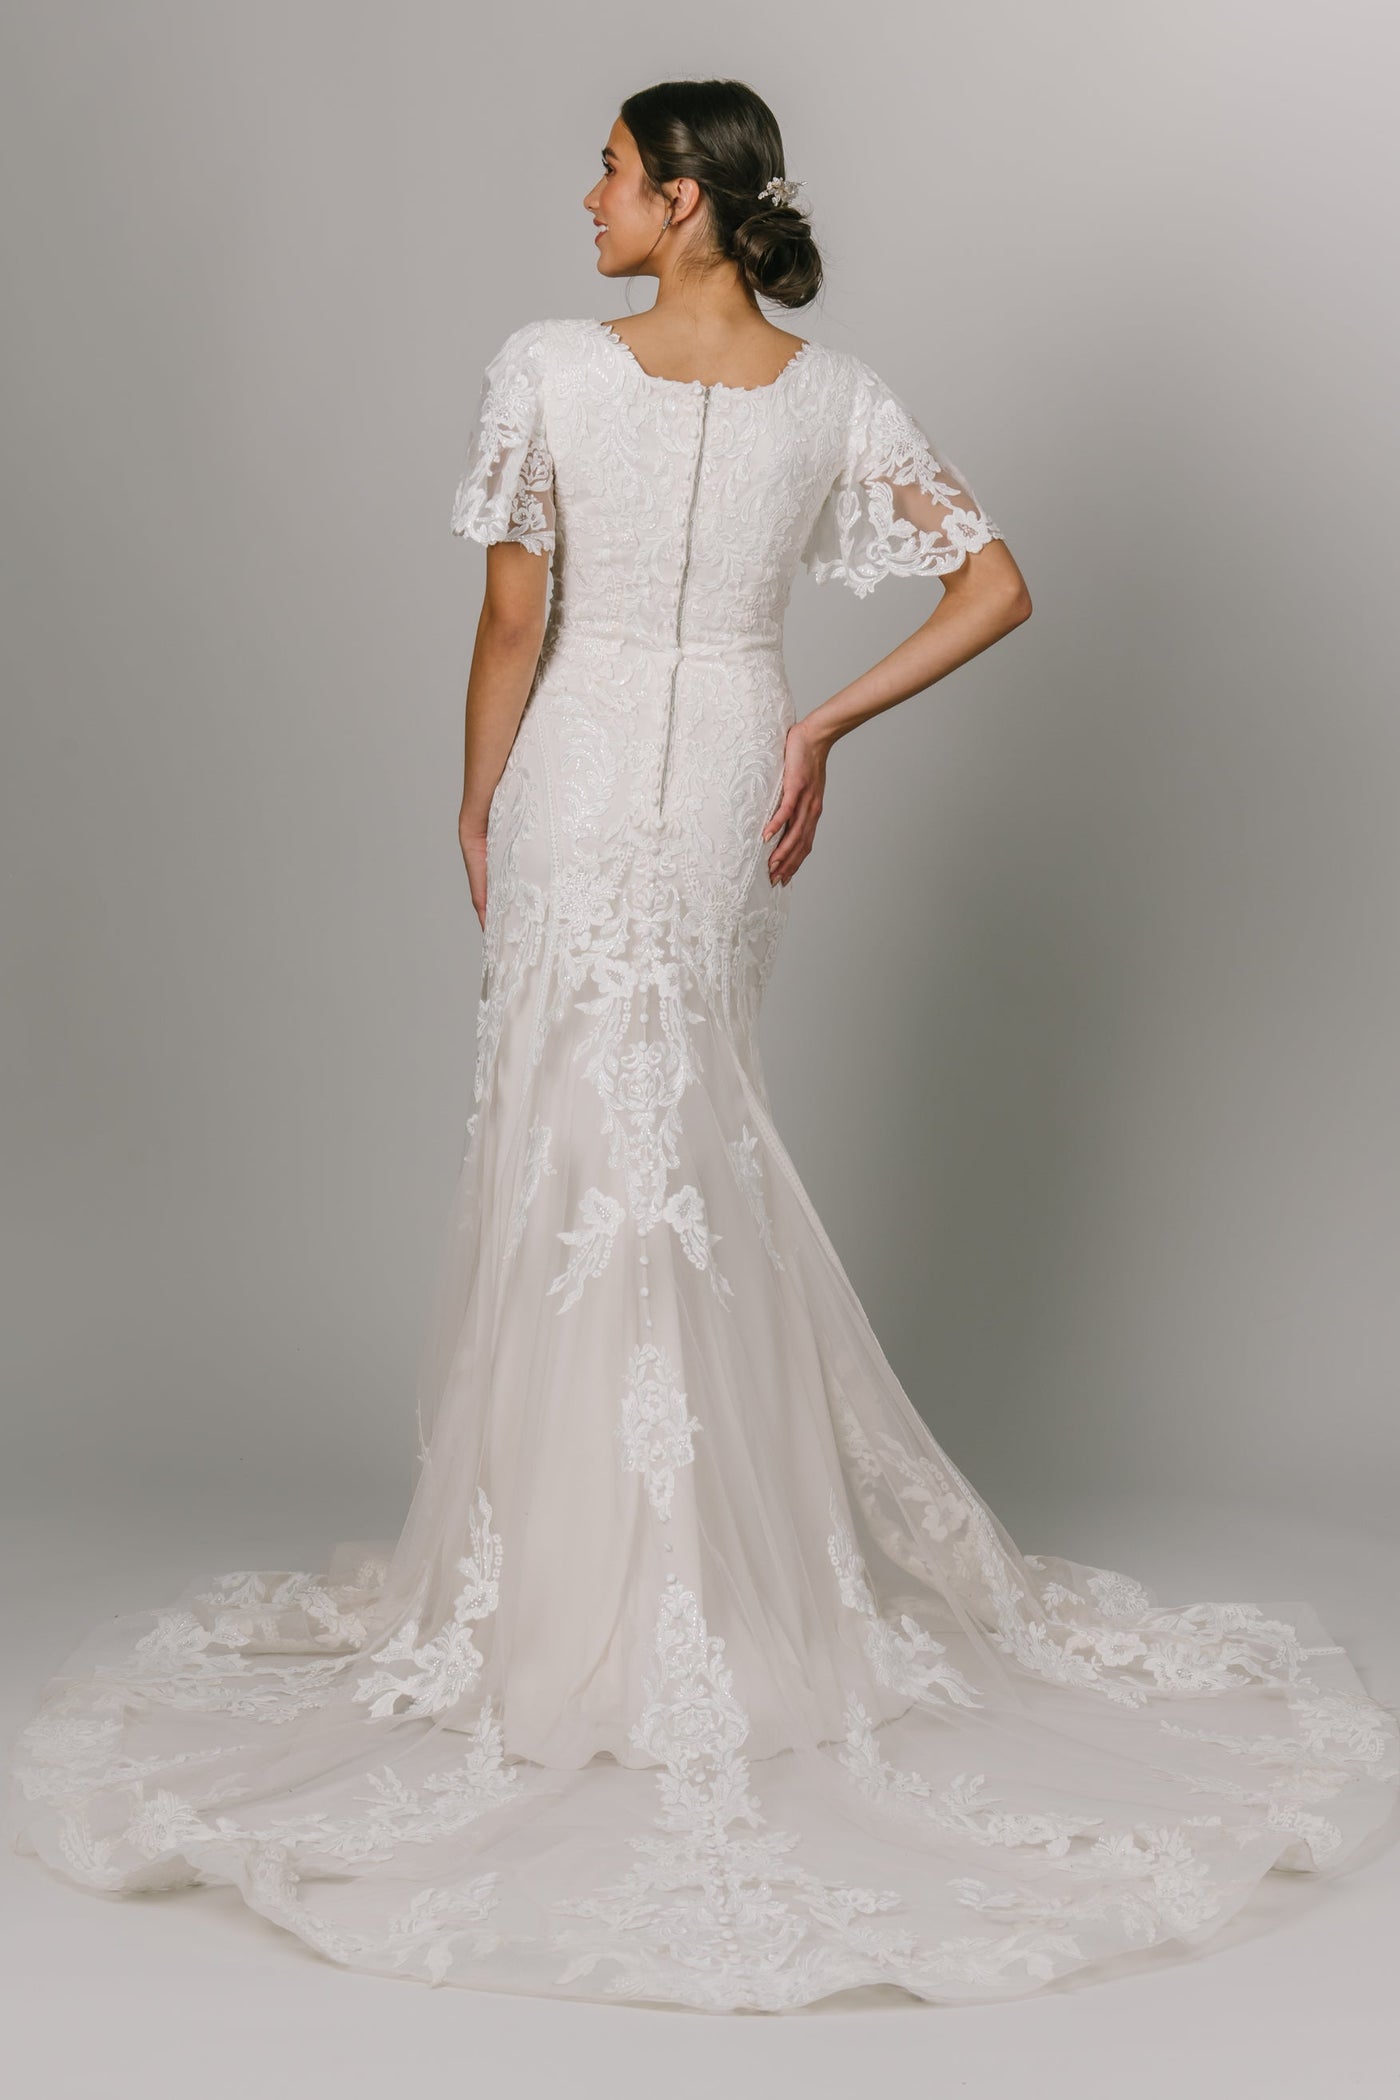 This Modest Wedding Dress features a round neckline and flutter sleeves with a fit and flare fit - Modest Wedding Dresses -Modes Dresses - Modest Clothing - LatterDayBride